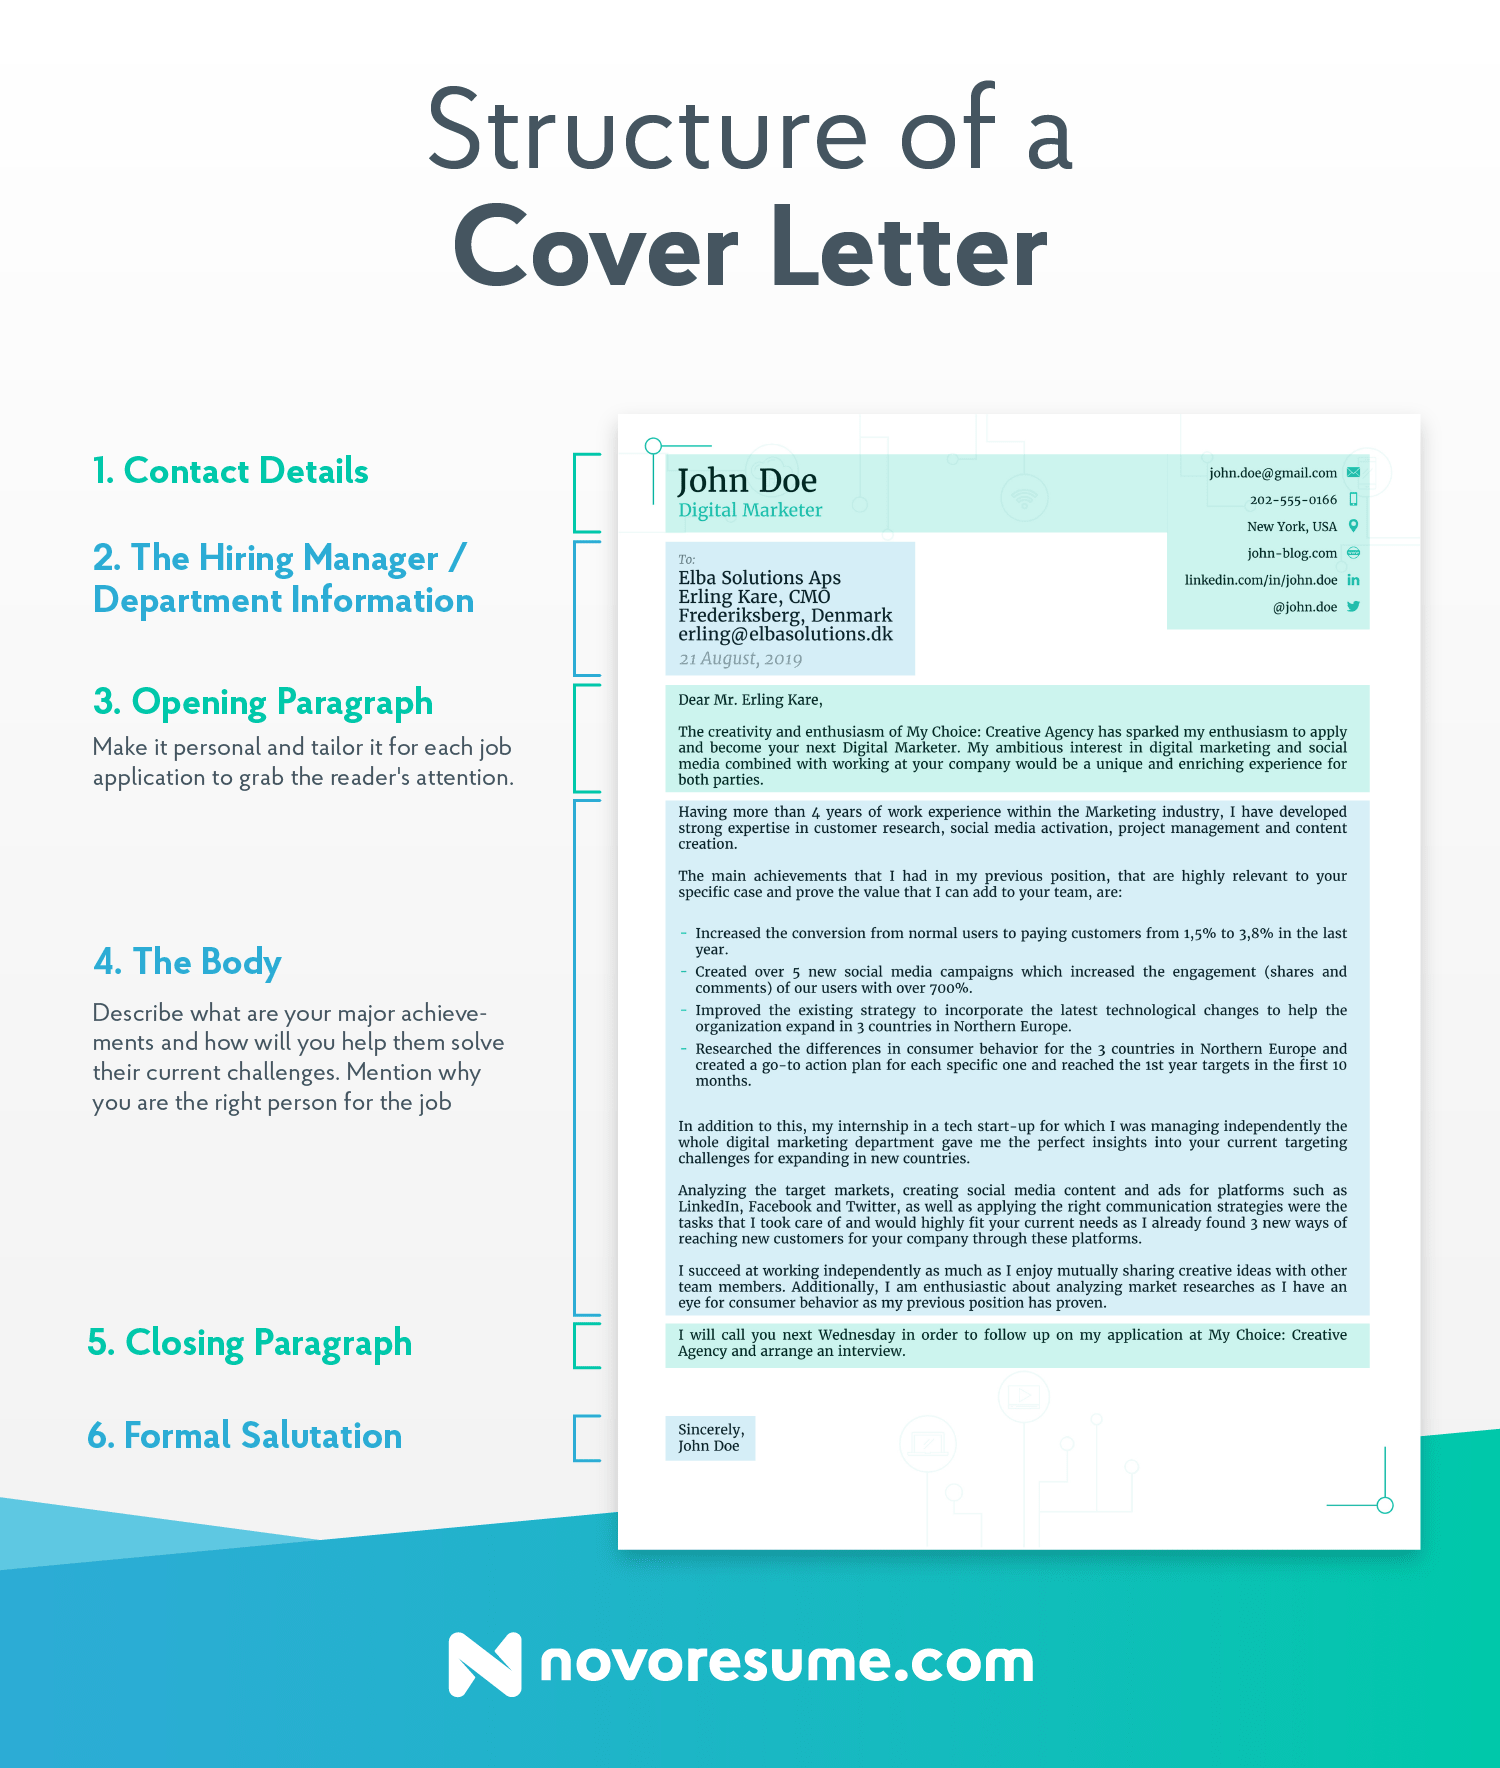 structure of a cover letter